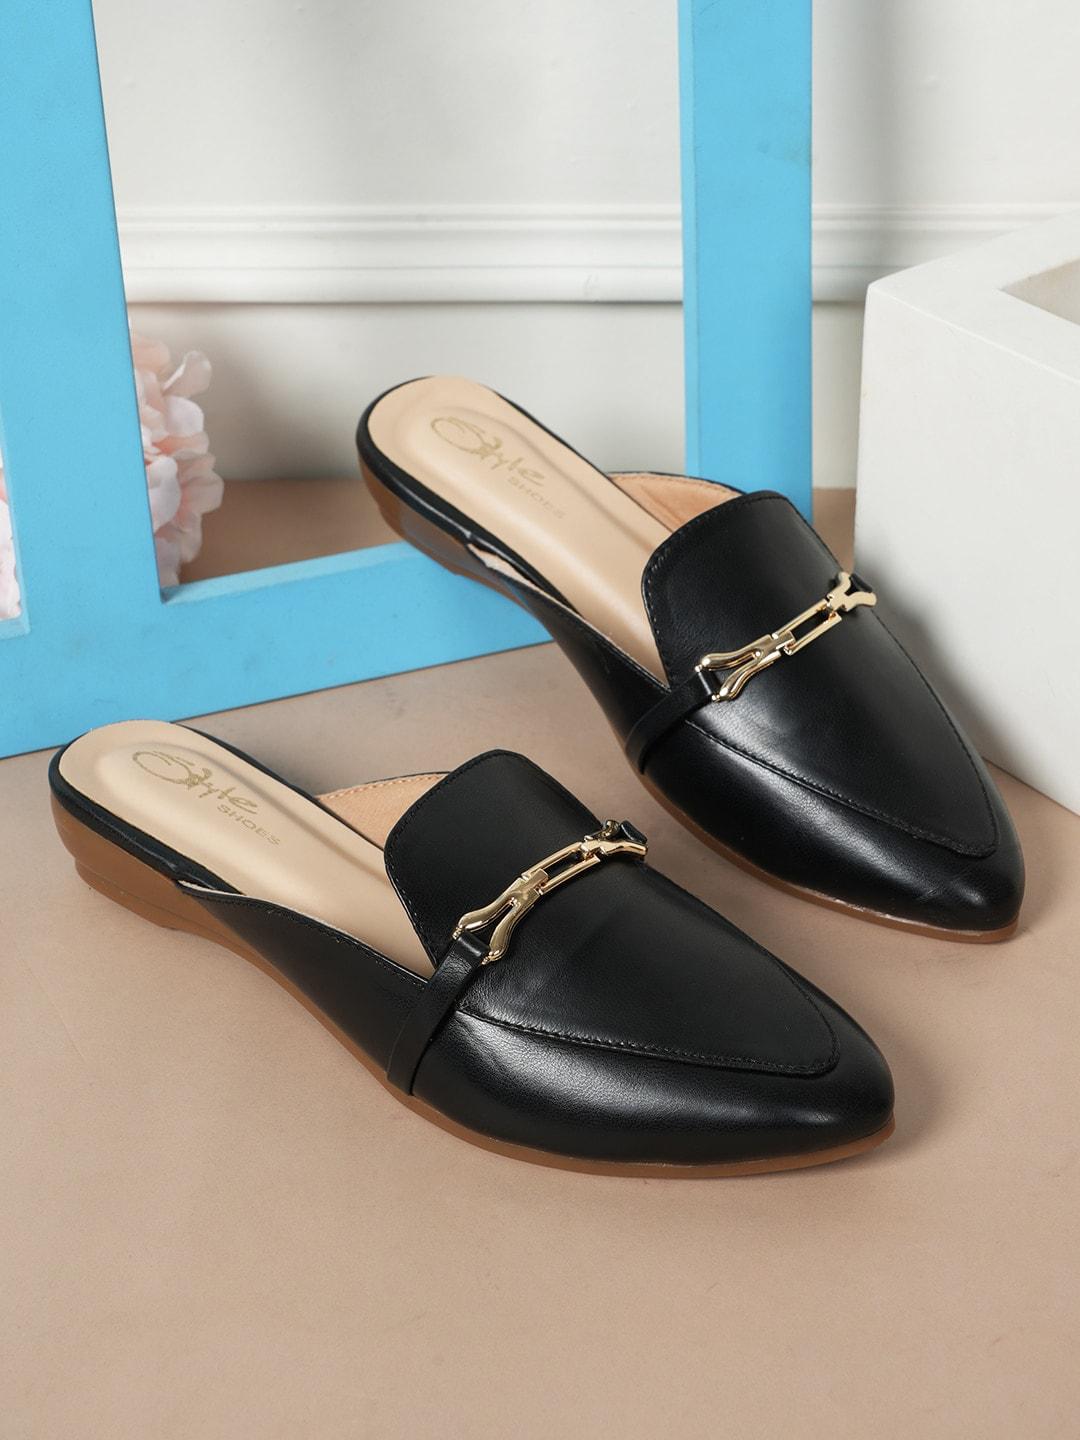 style shoes pointed toe embellished mules